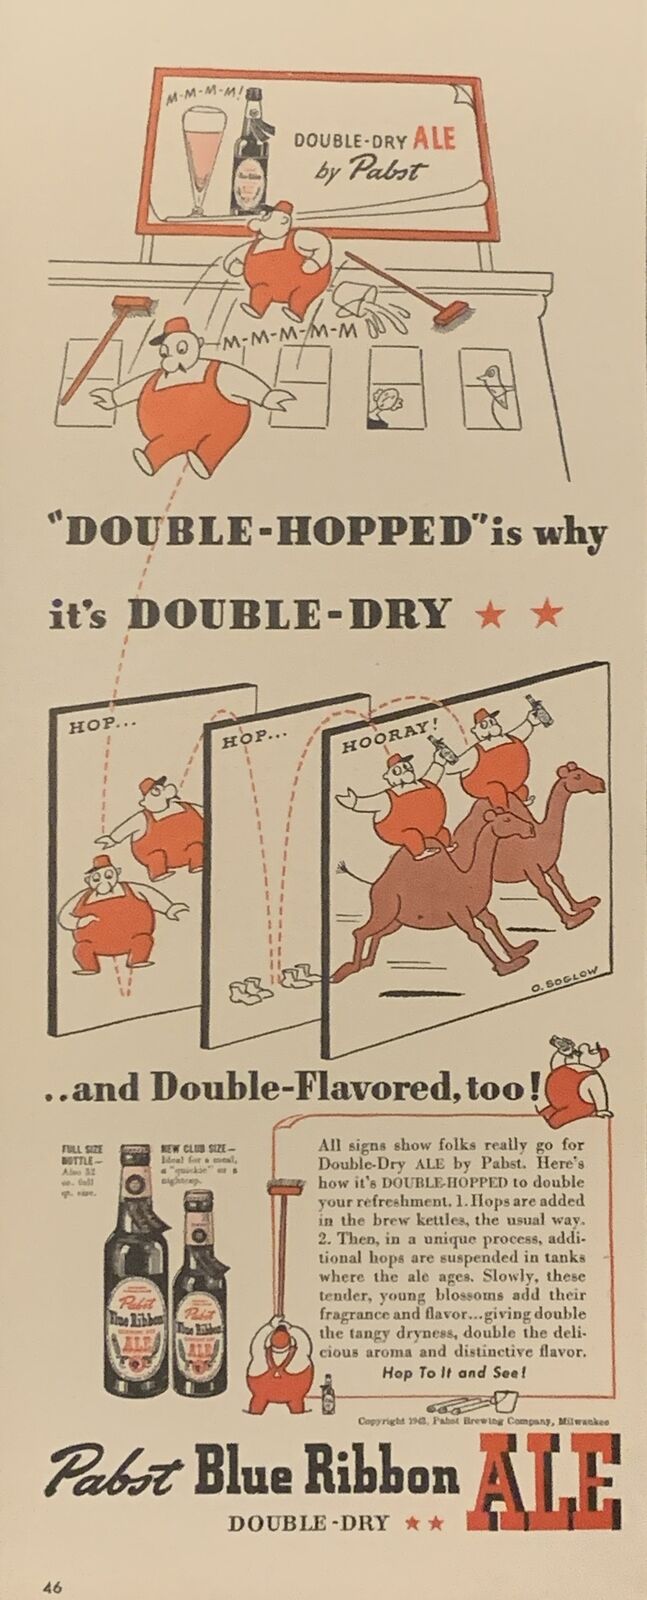 1942 Pabst Blue Ribbon Beer Double Dry Ale Comic Ride Camels VTG 1940s PRINT AD